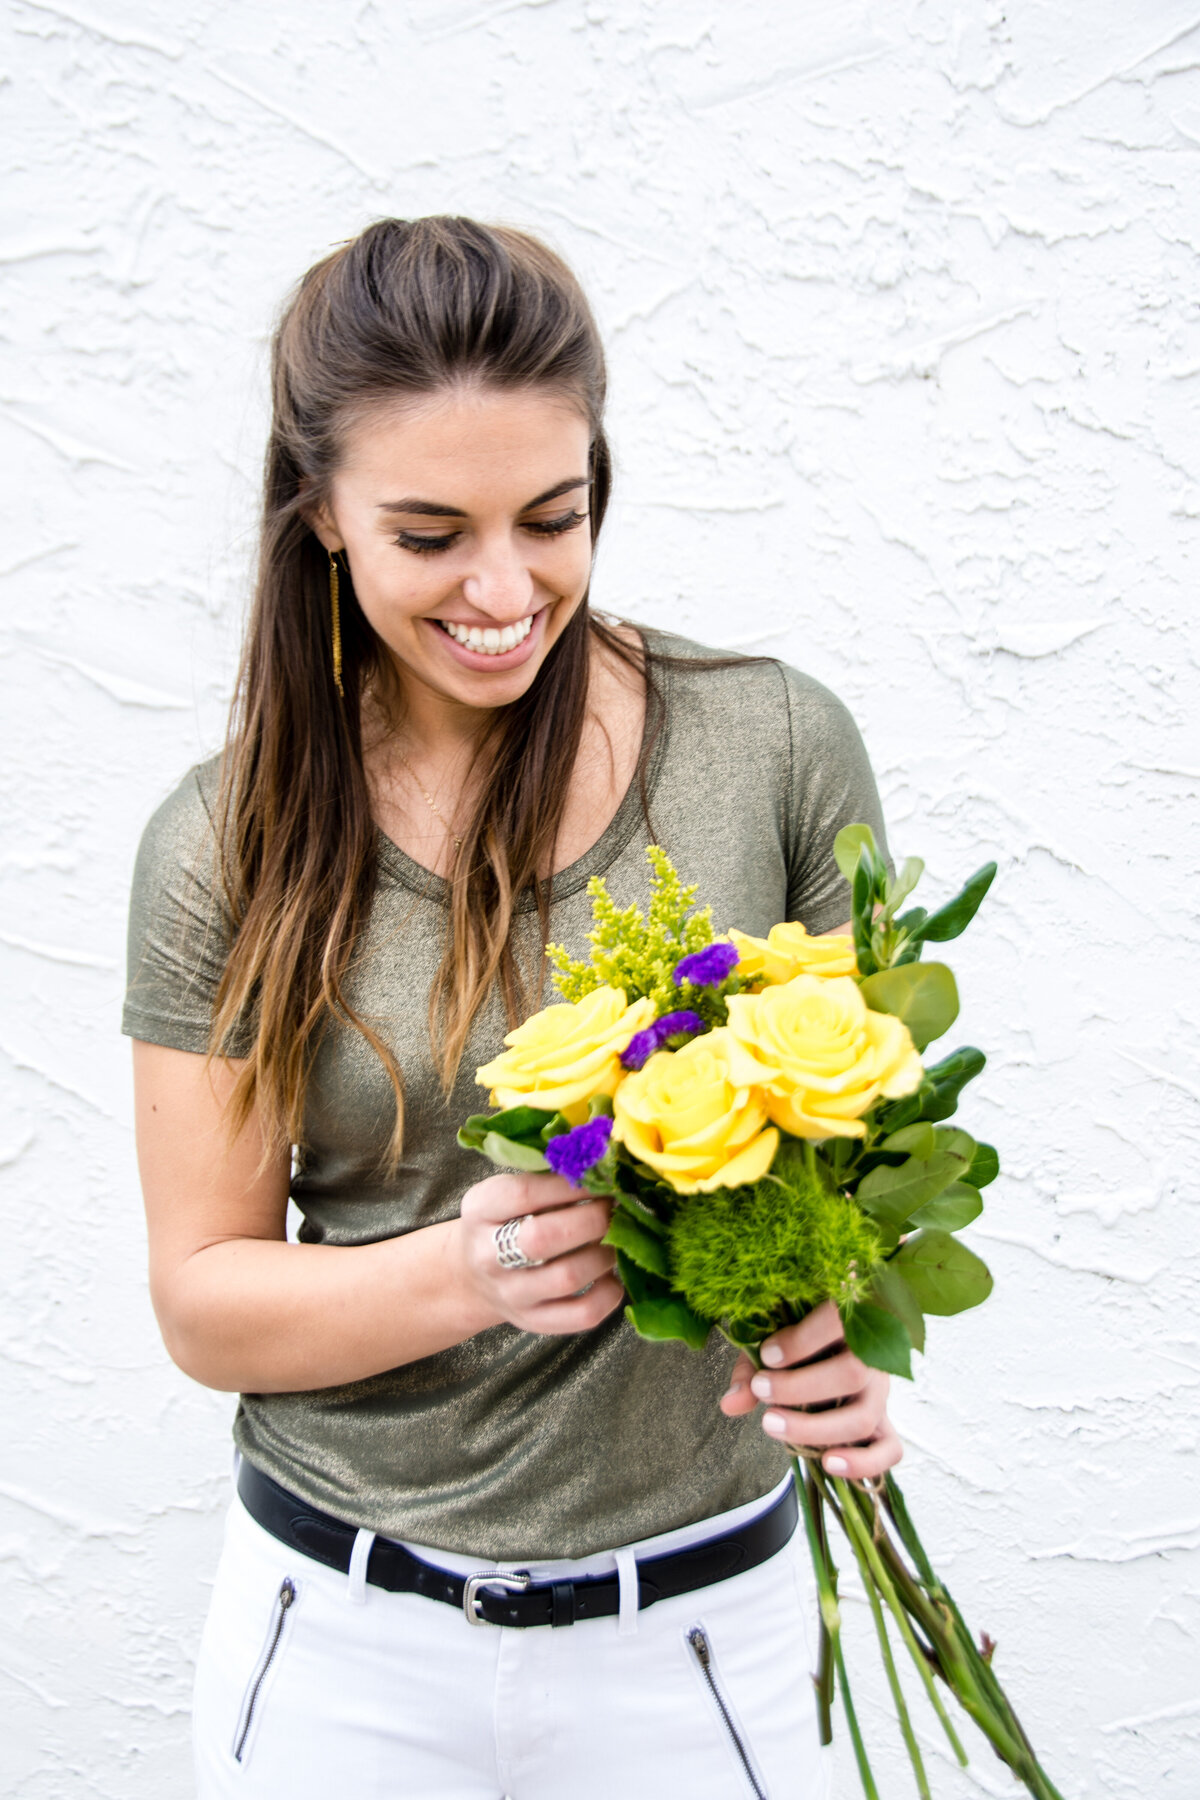 Smiling woman looks down at a bouquet of yellow and purple flowers